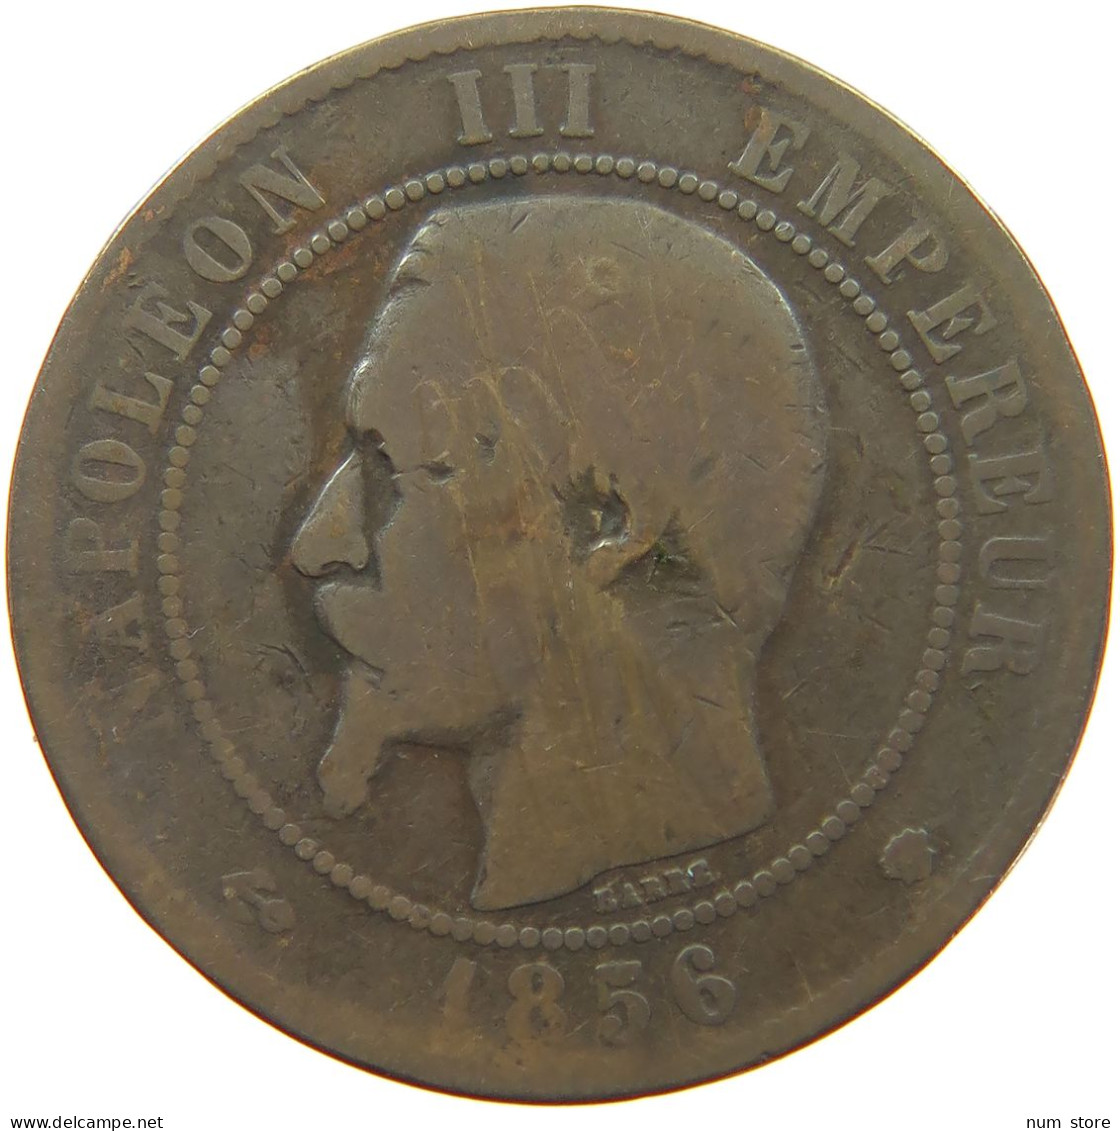 FRANCE 10 CENTIMES 1856 MA #a066 0055 - 10 Centimes